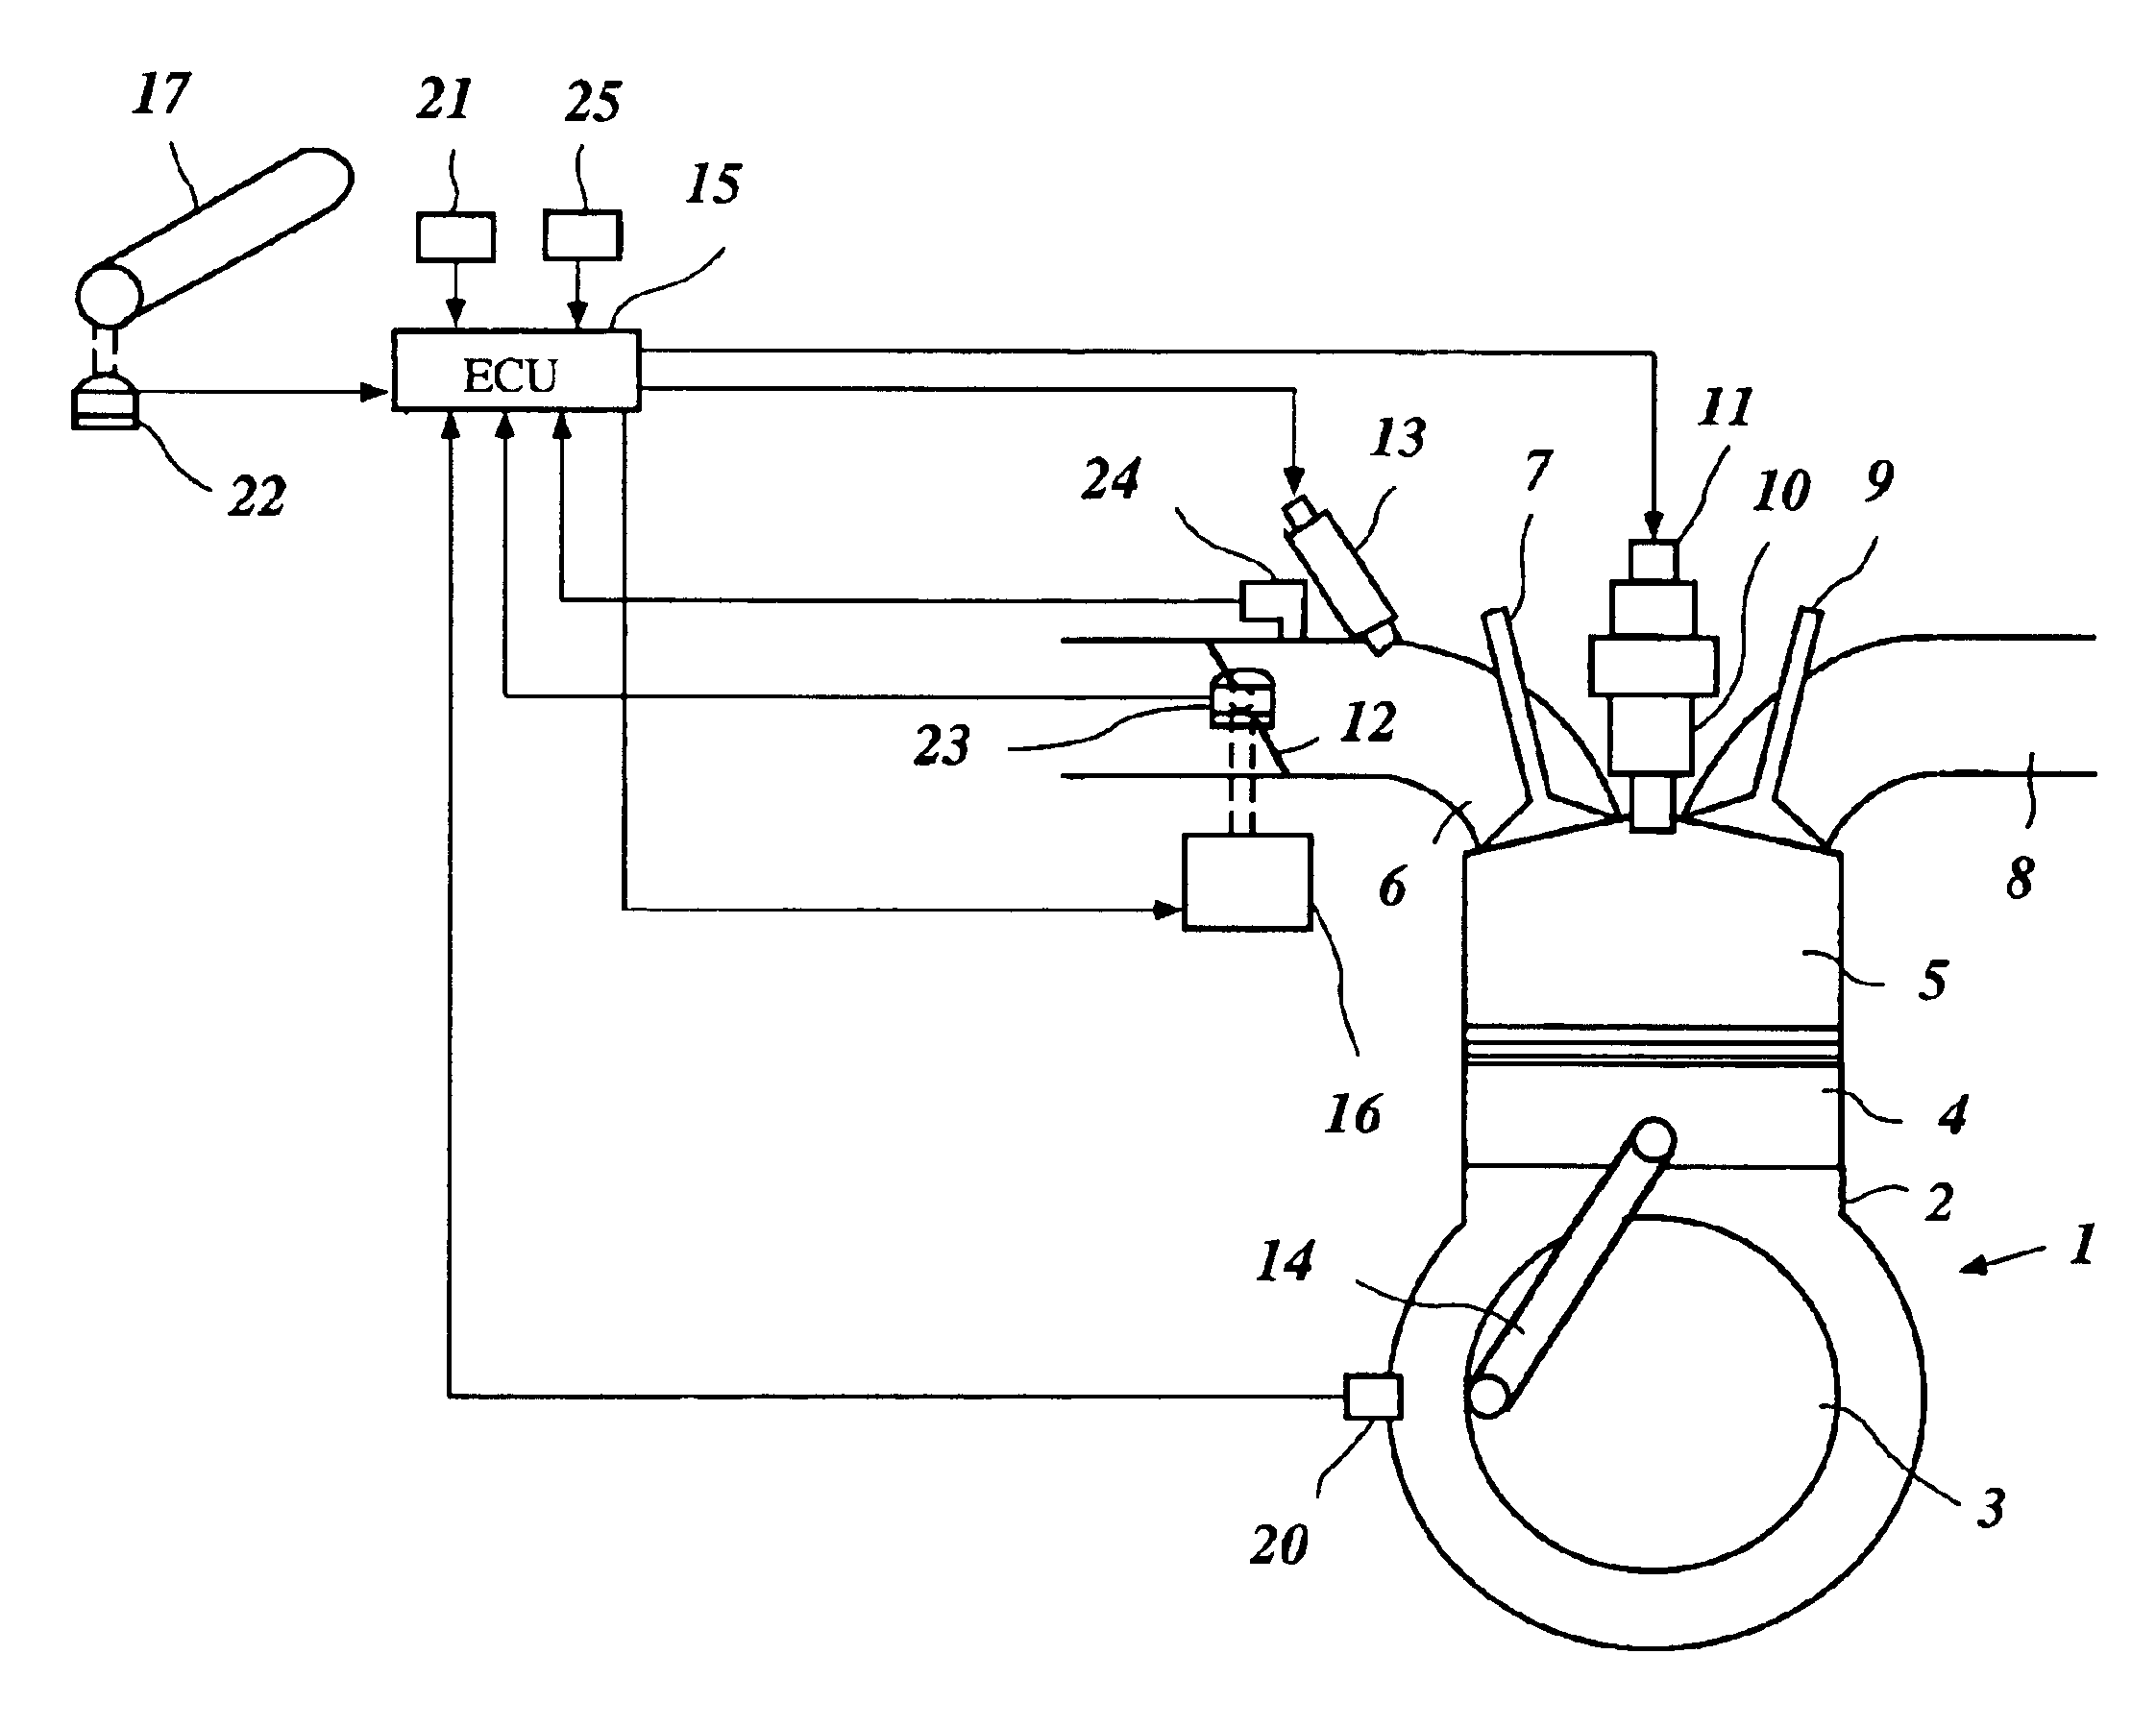 Electronic engine control device